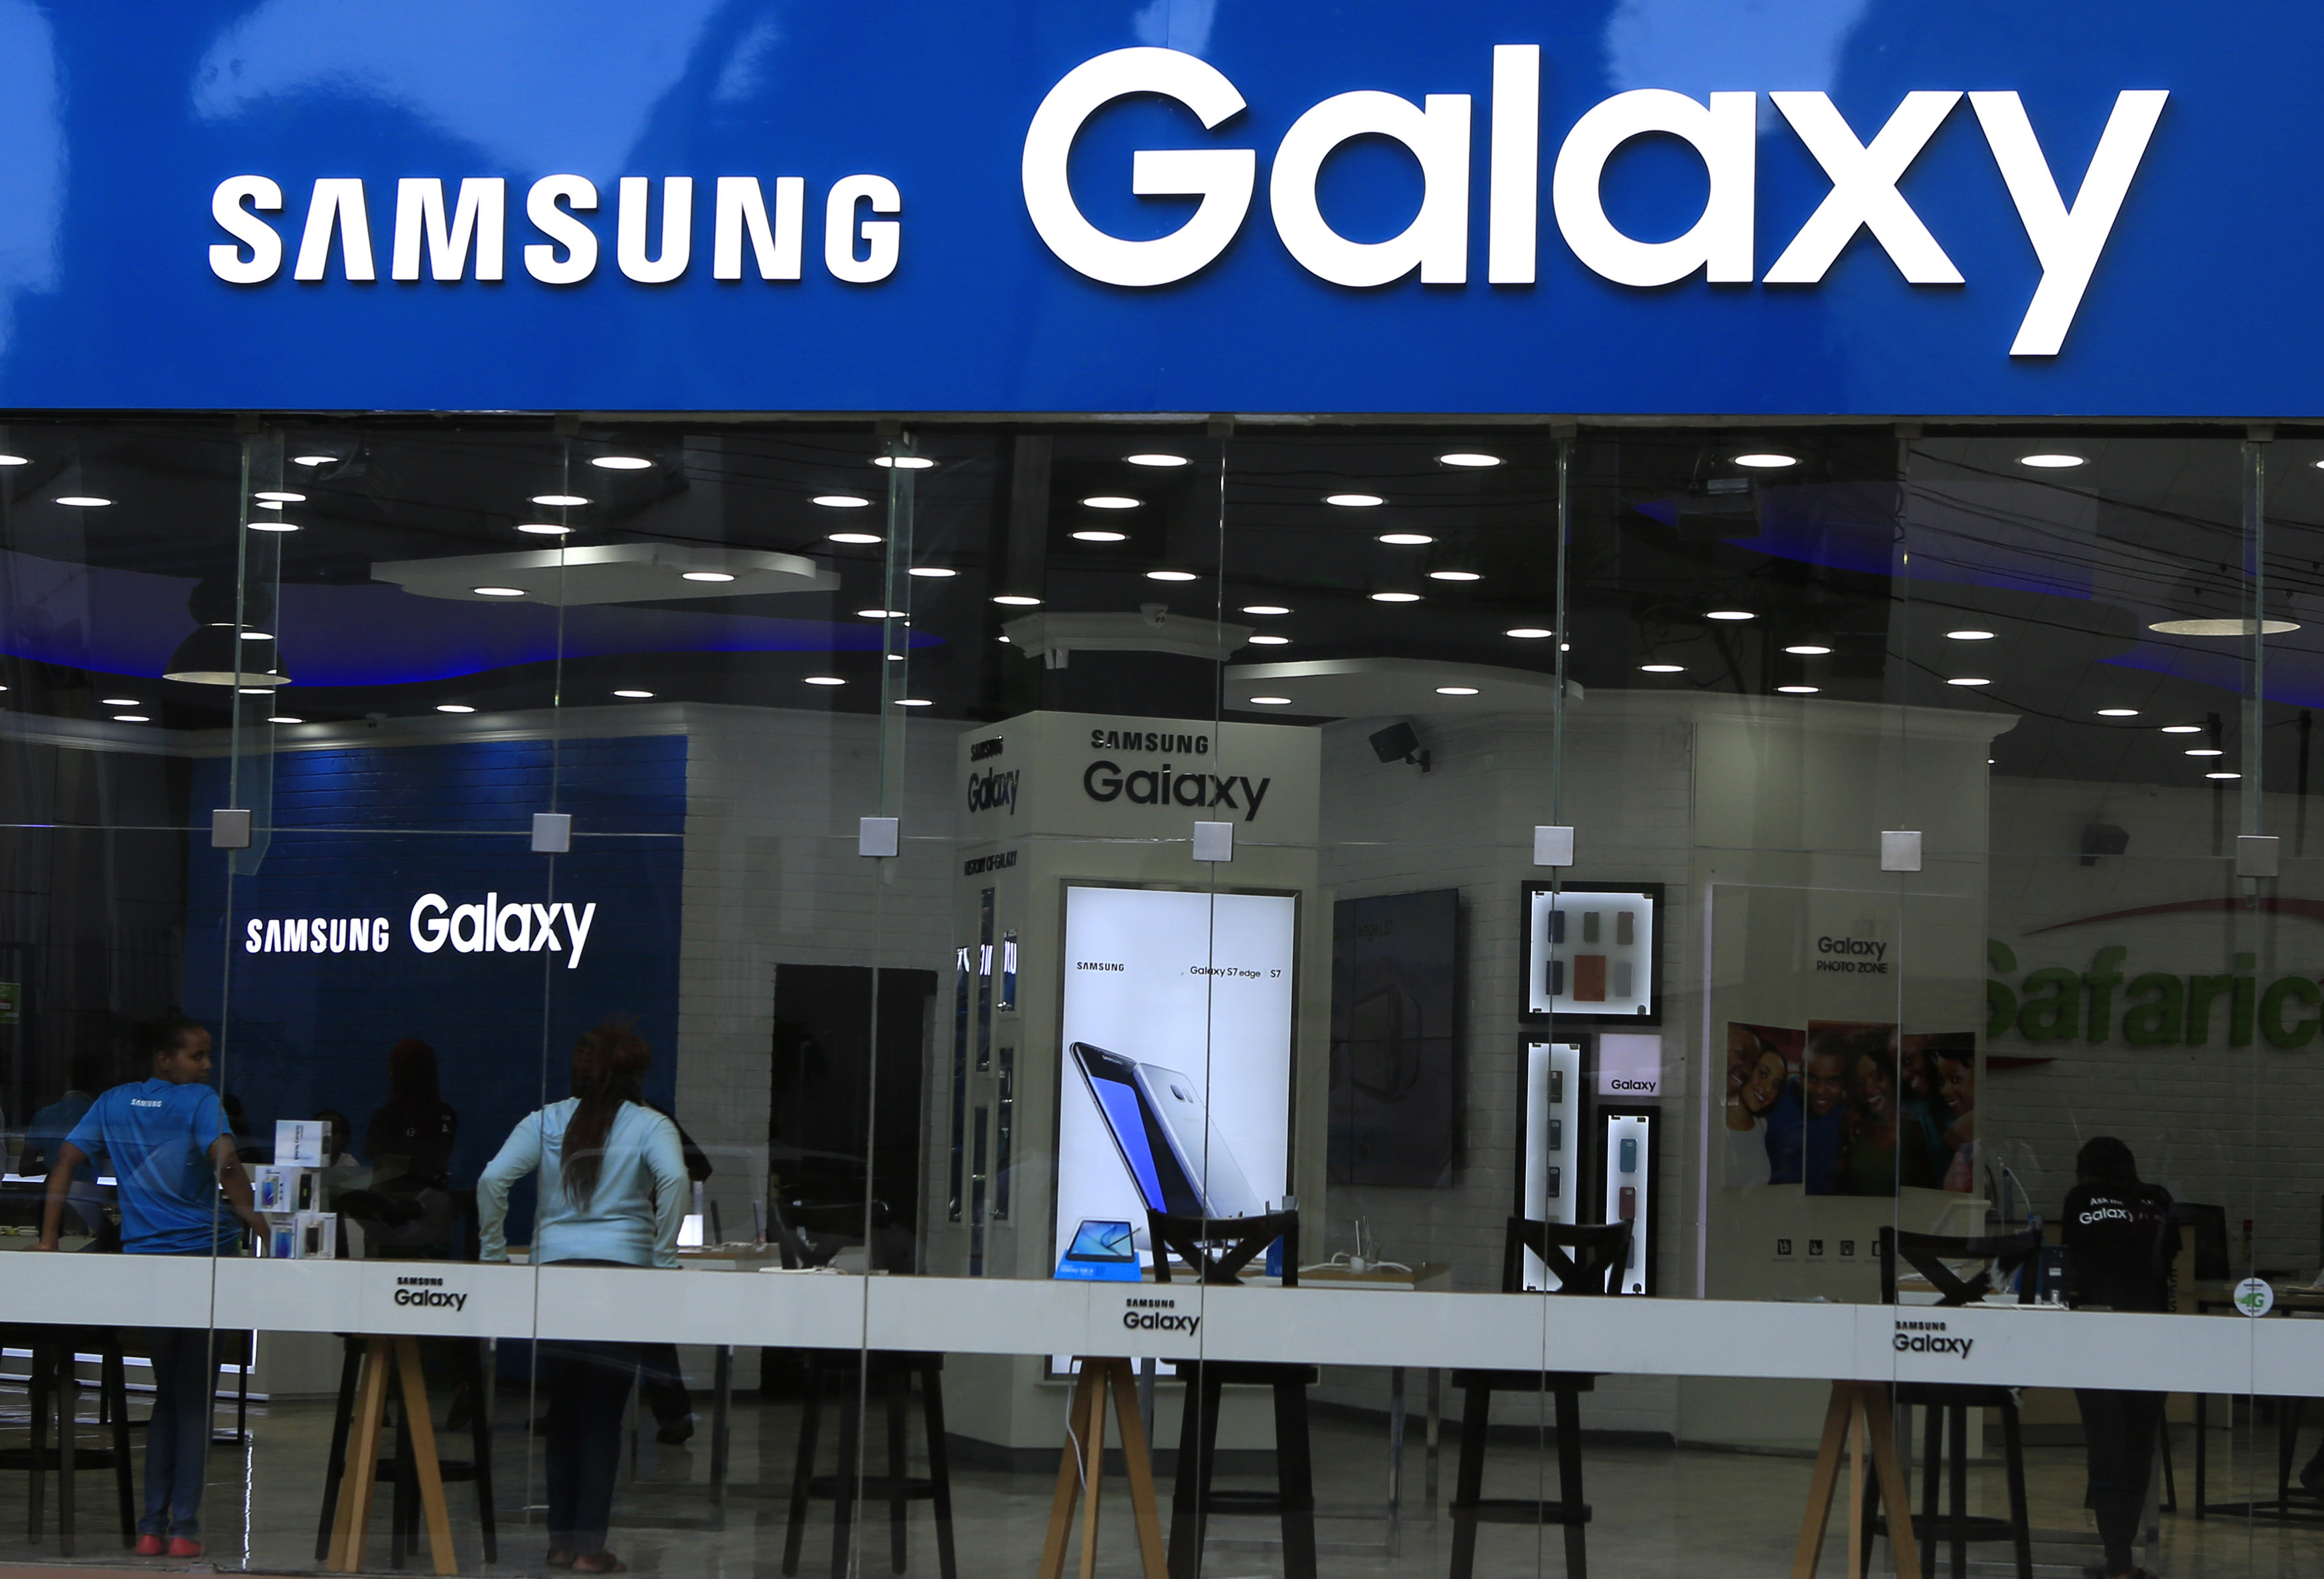 A Samsung mobile phone and accessories shop in capital Nairobi